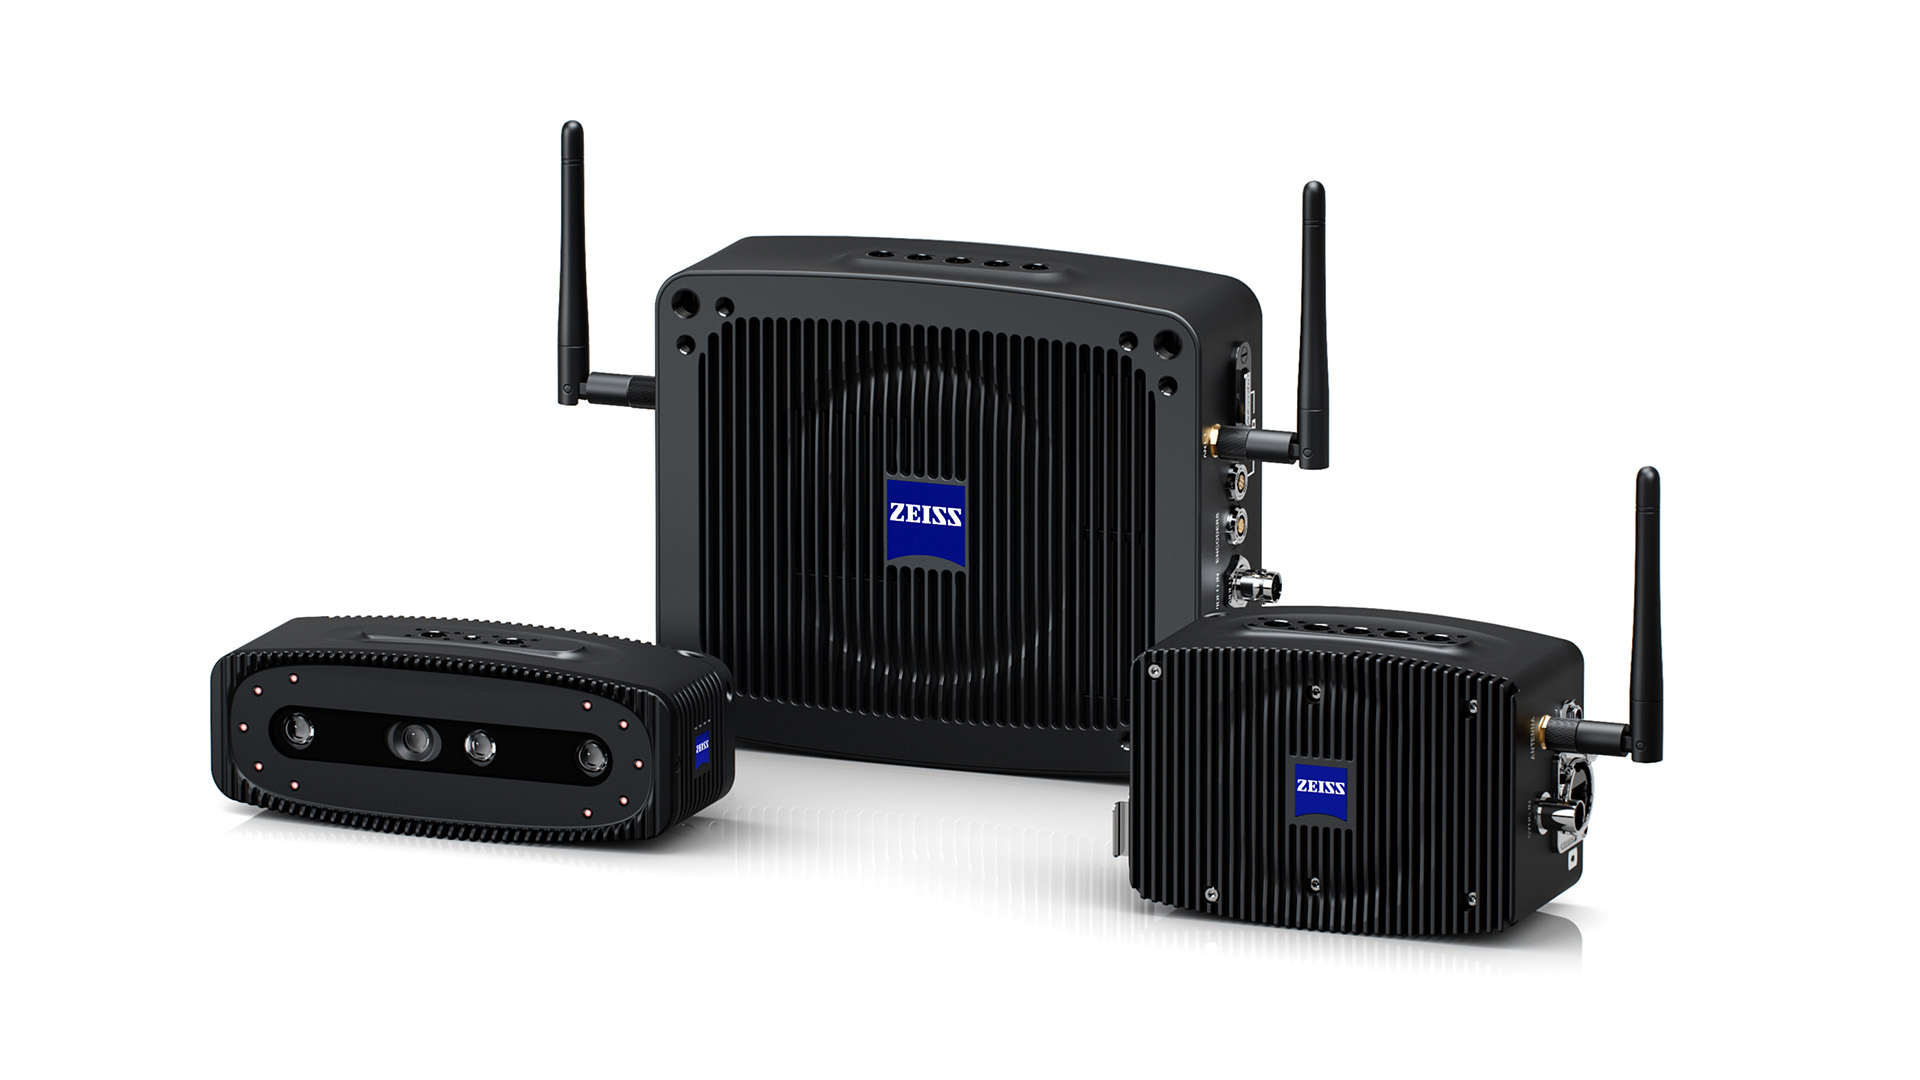 With CinCraft Scenario, ZEISS presents a new powerful and flexible camera tracking system as part of their CinCraft ecosystem tkt1957.com